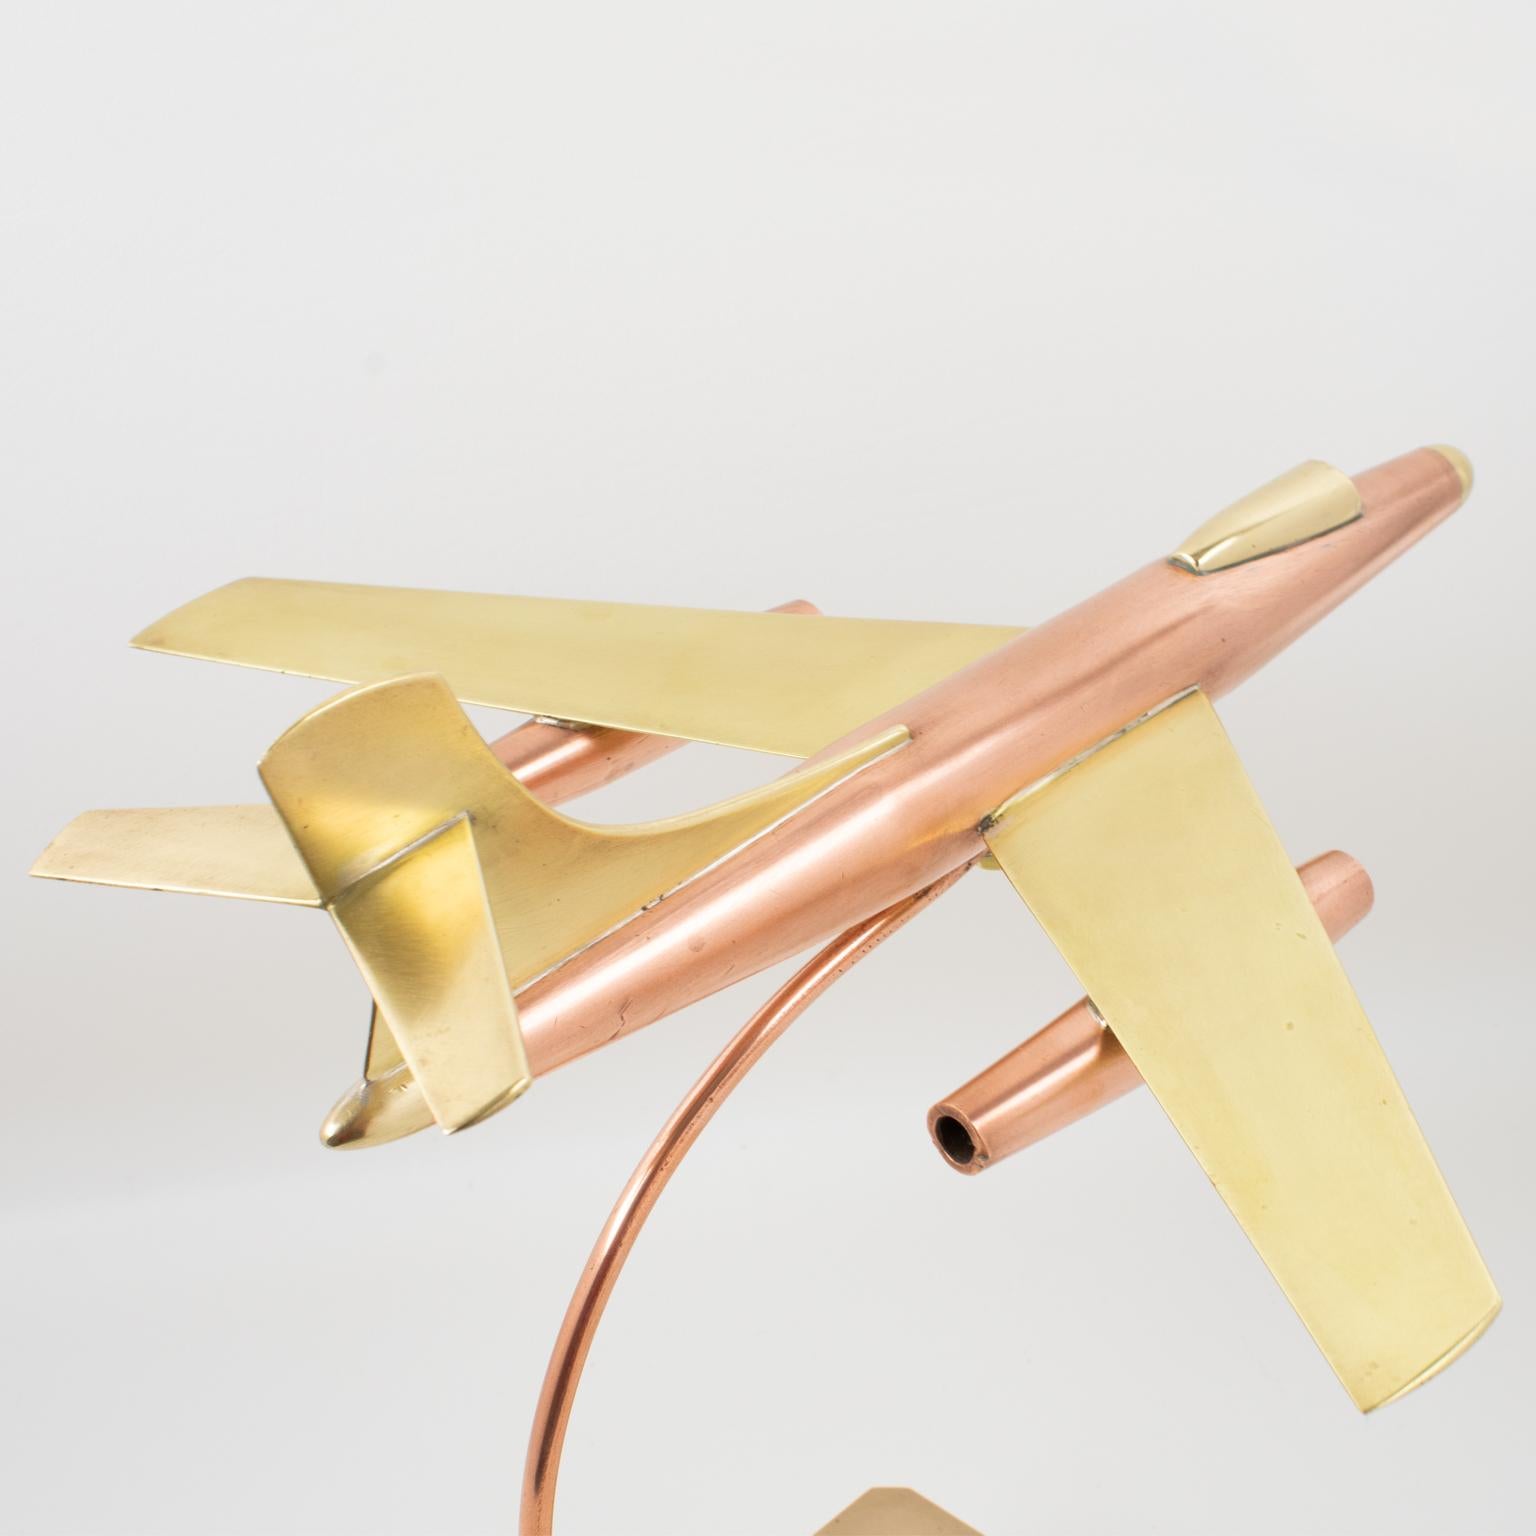 Brass and Copper Airplane Jet Aviation Model, France 1960s For Sale 4